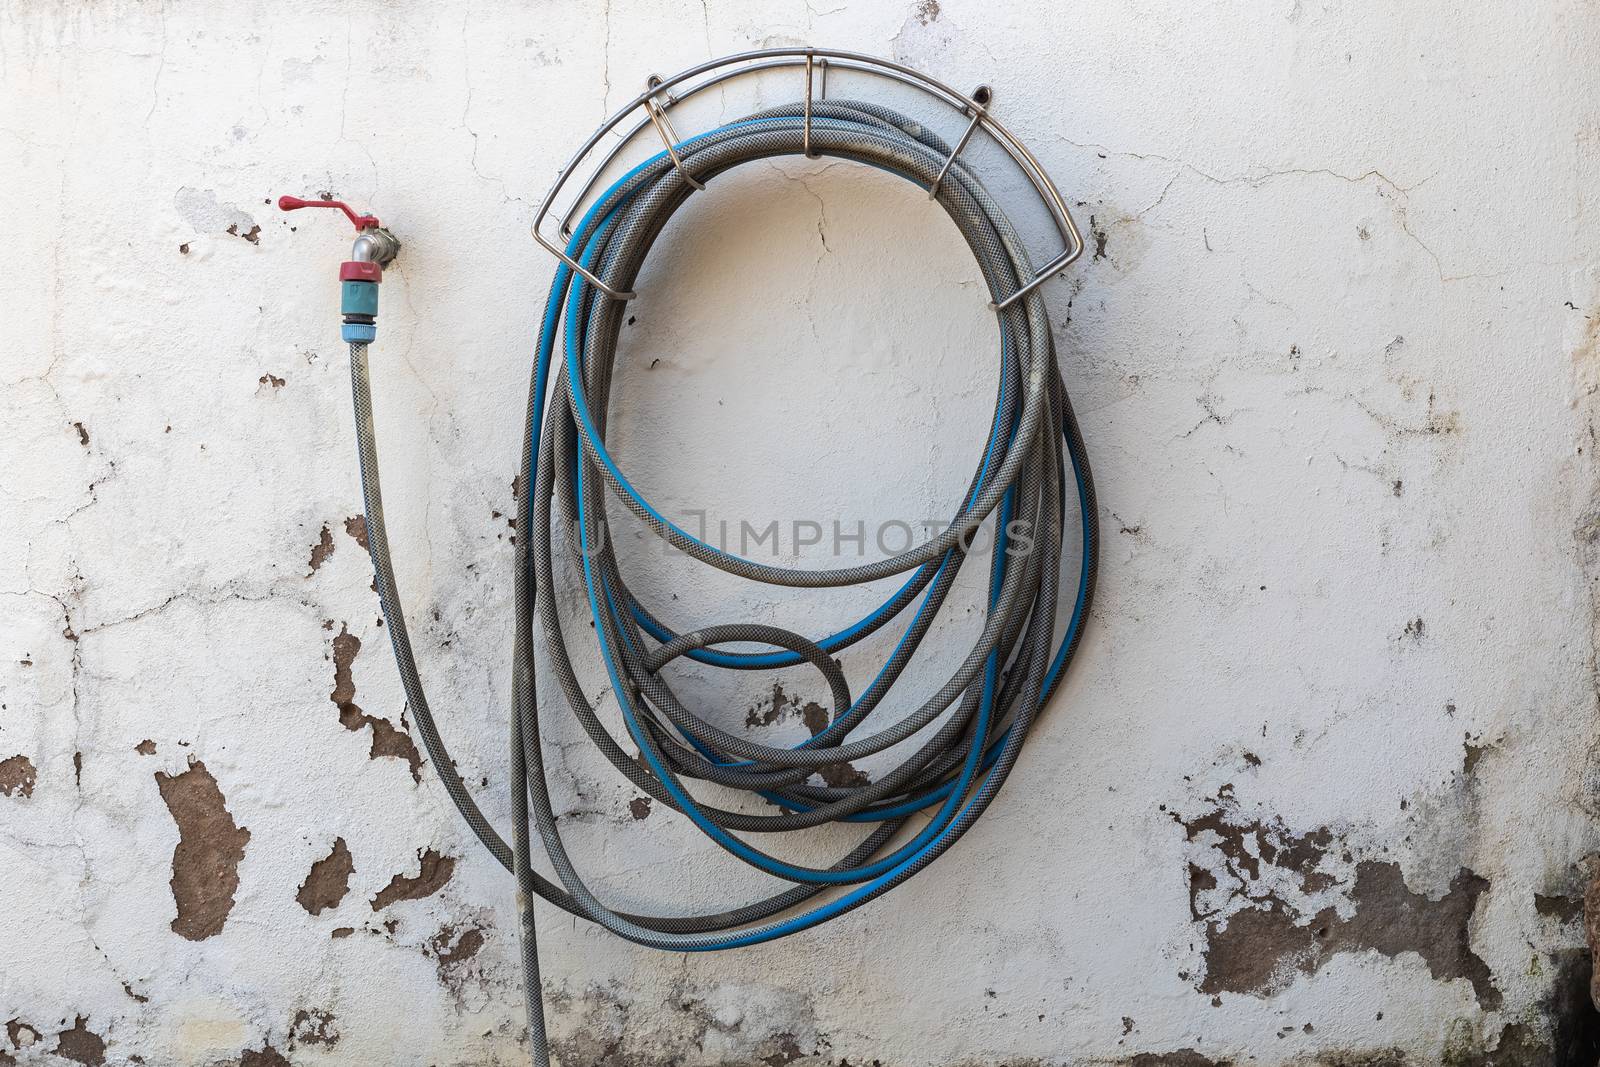 garden hose connected to a tap on a white wall with worn paint